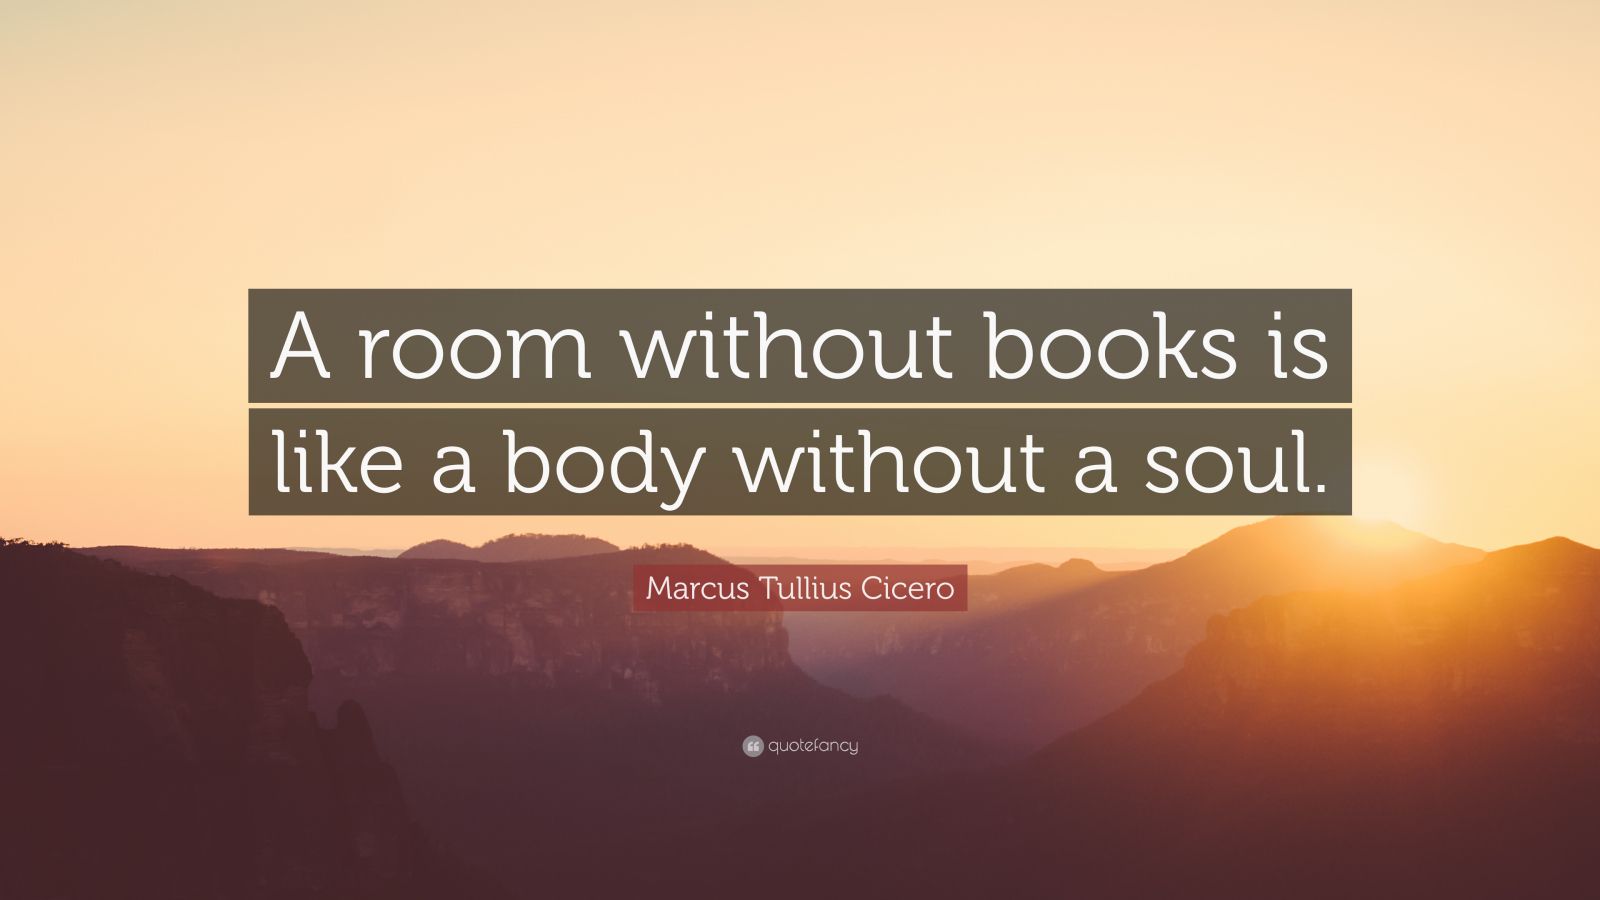 80  A Room Without Books Is A Body Without Soul Meaning for Kids